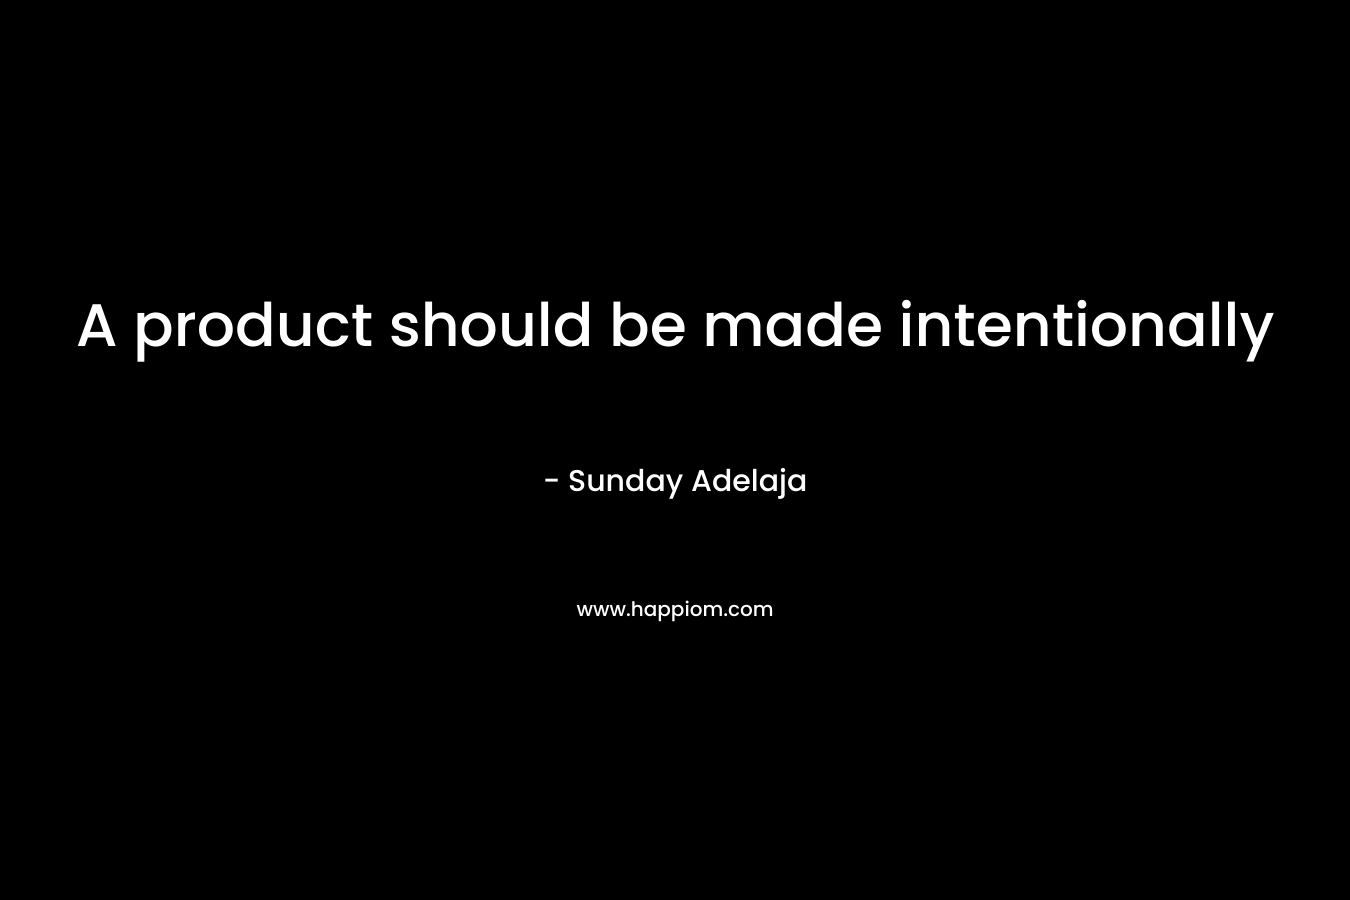 A product should be made intentionally